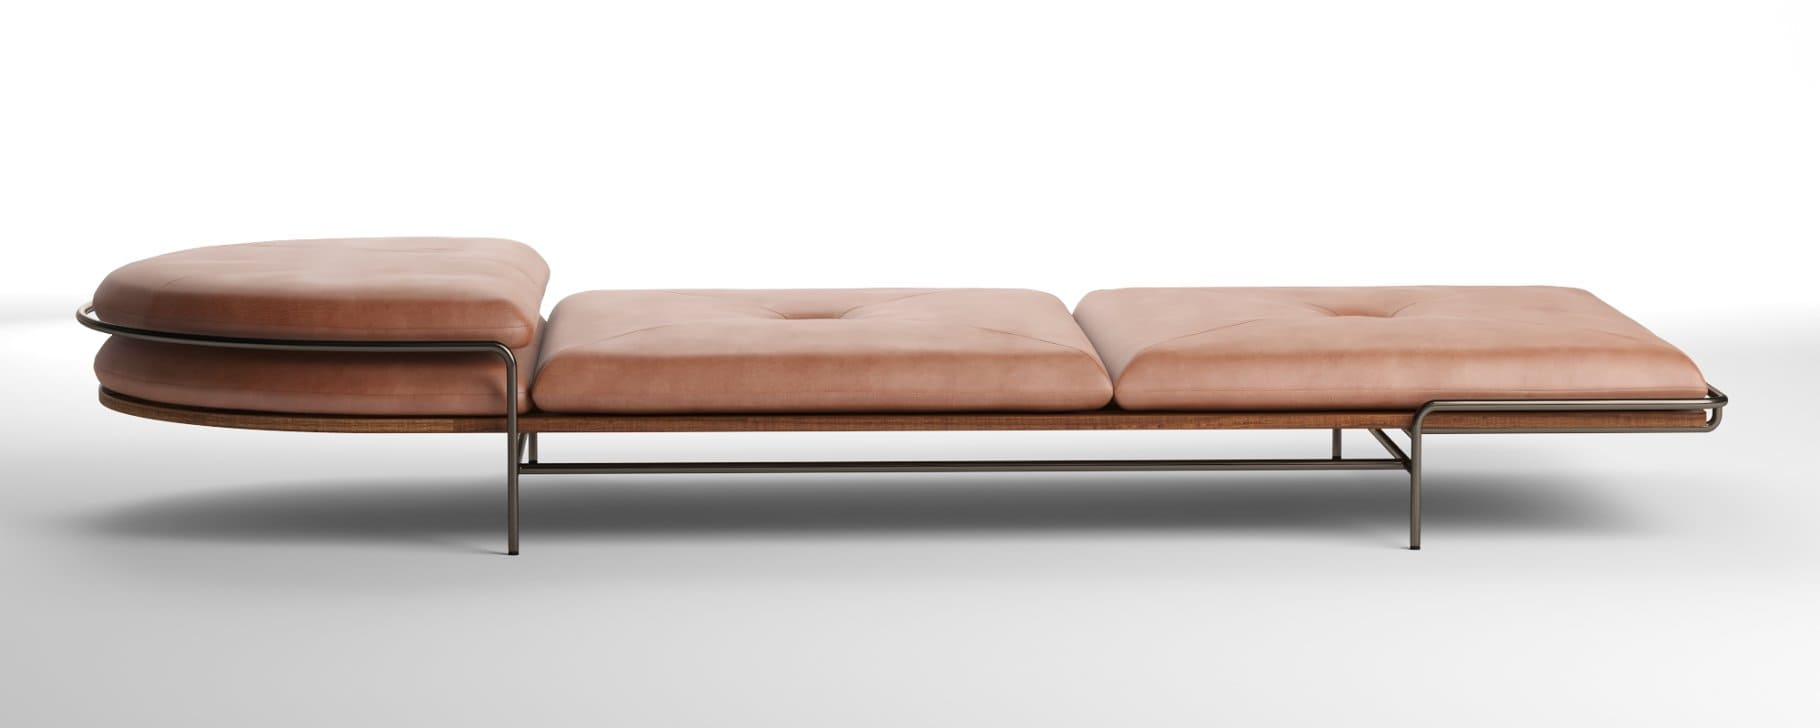 Side view of Geometric Daybed by Bassam fellows.